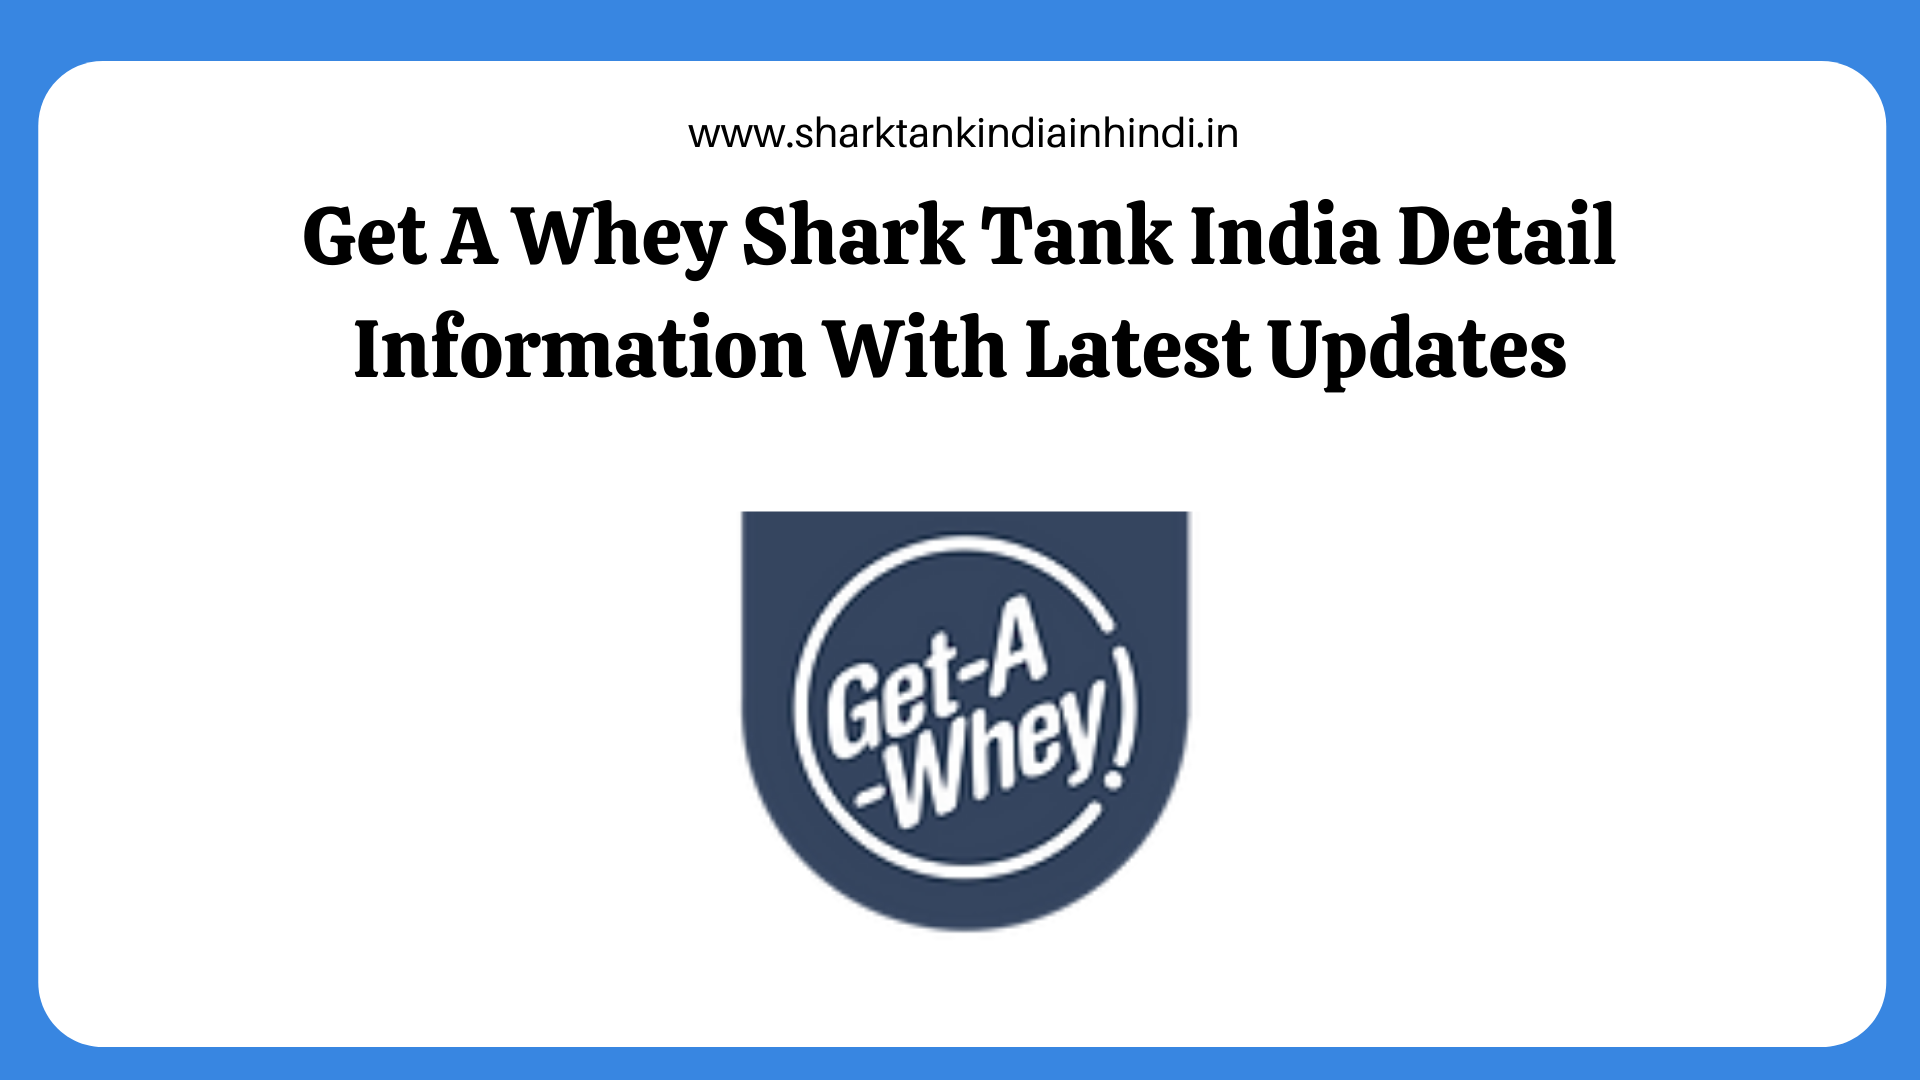 Get A Whey Shark Tank India Detail Information With Latest Updates